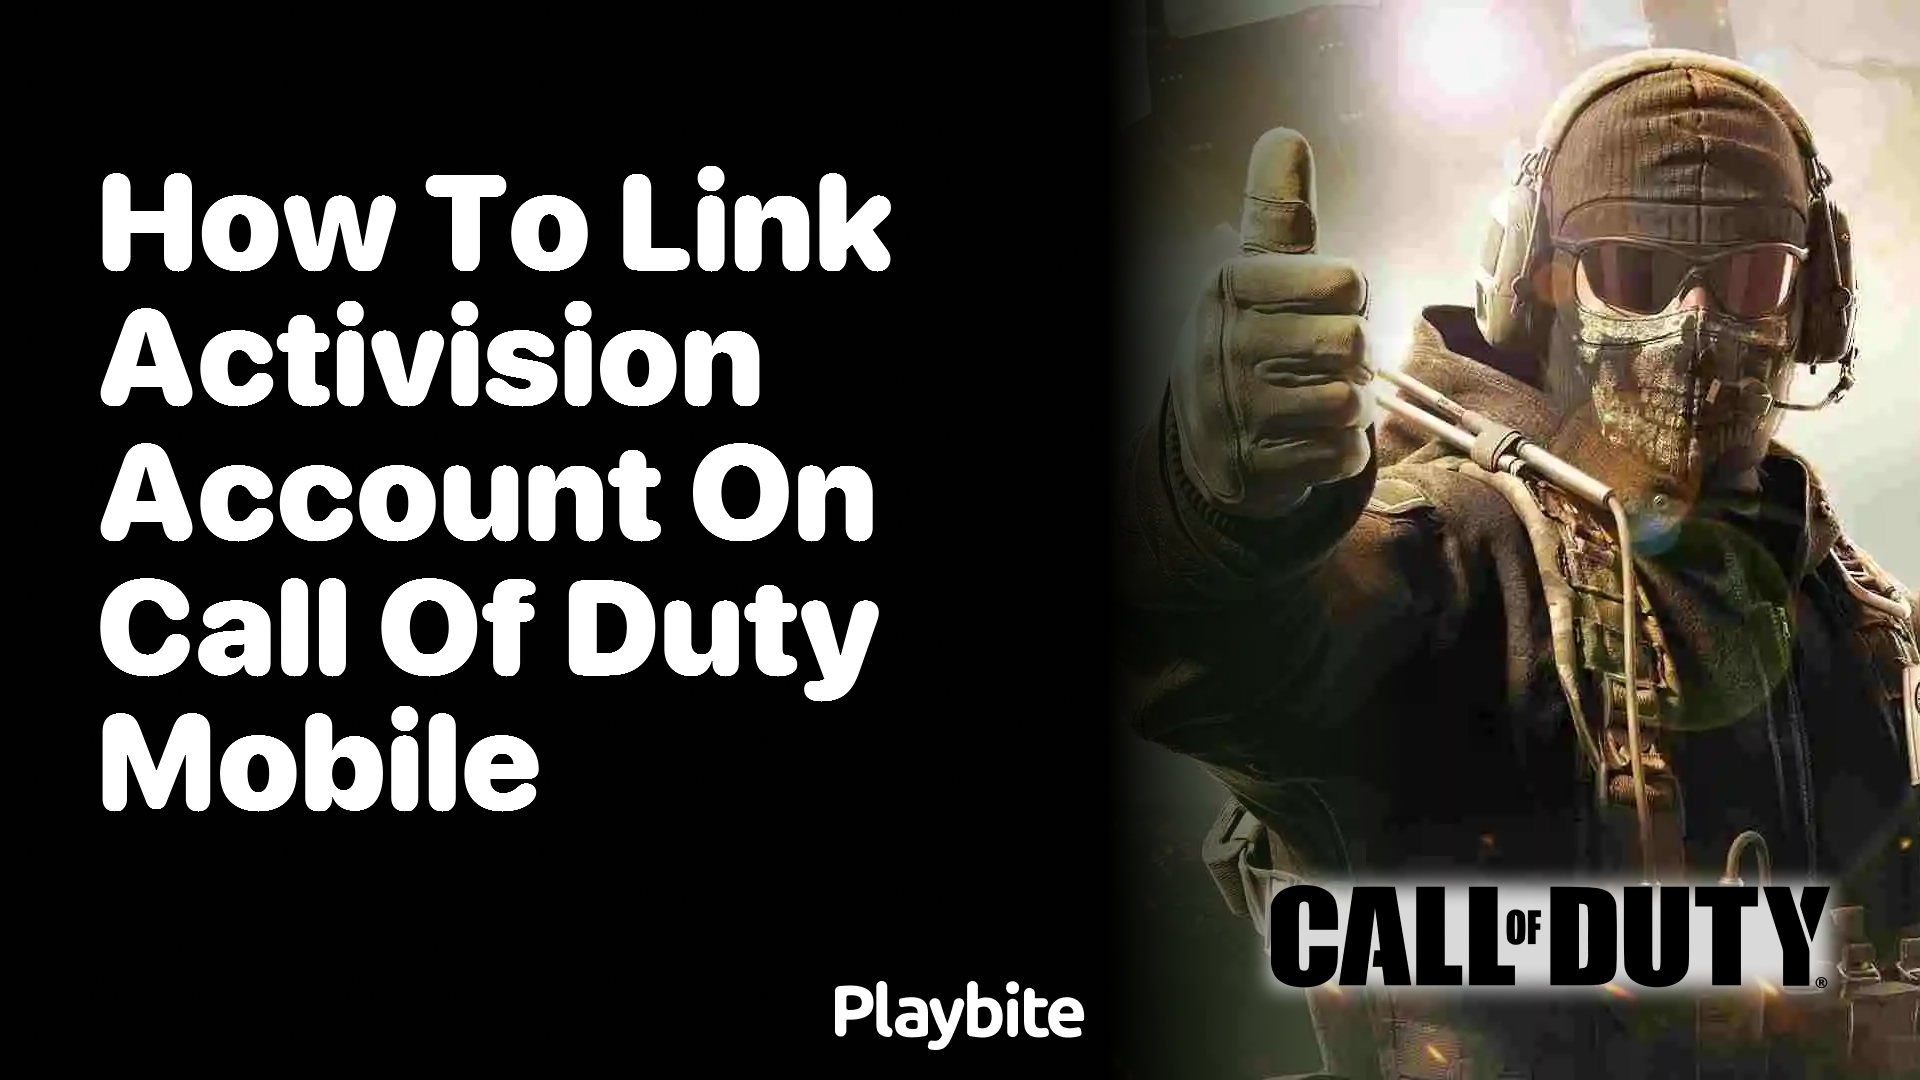 How to Link Your Activision Account on Call of Duty Mobile